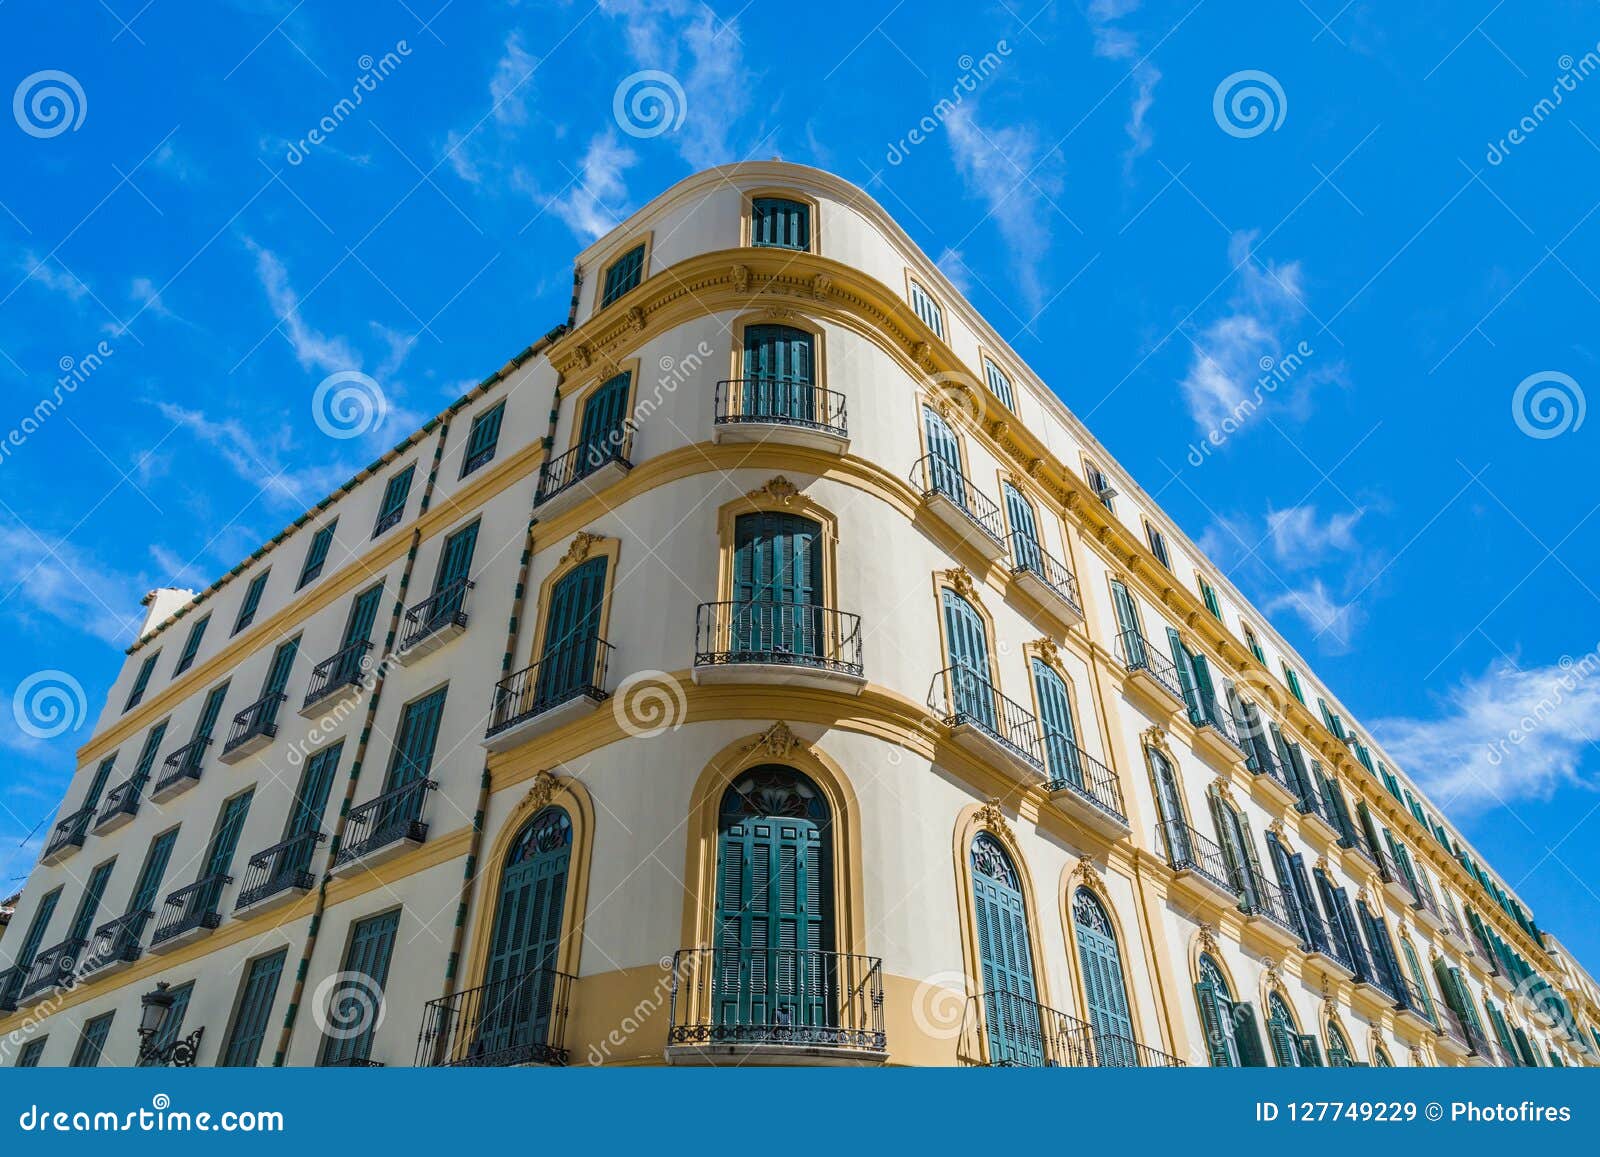 Pablo Picasso S House Museum In Malaga Spain Editorial Stock Image Image Of Famous Malaga